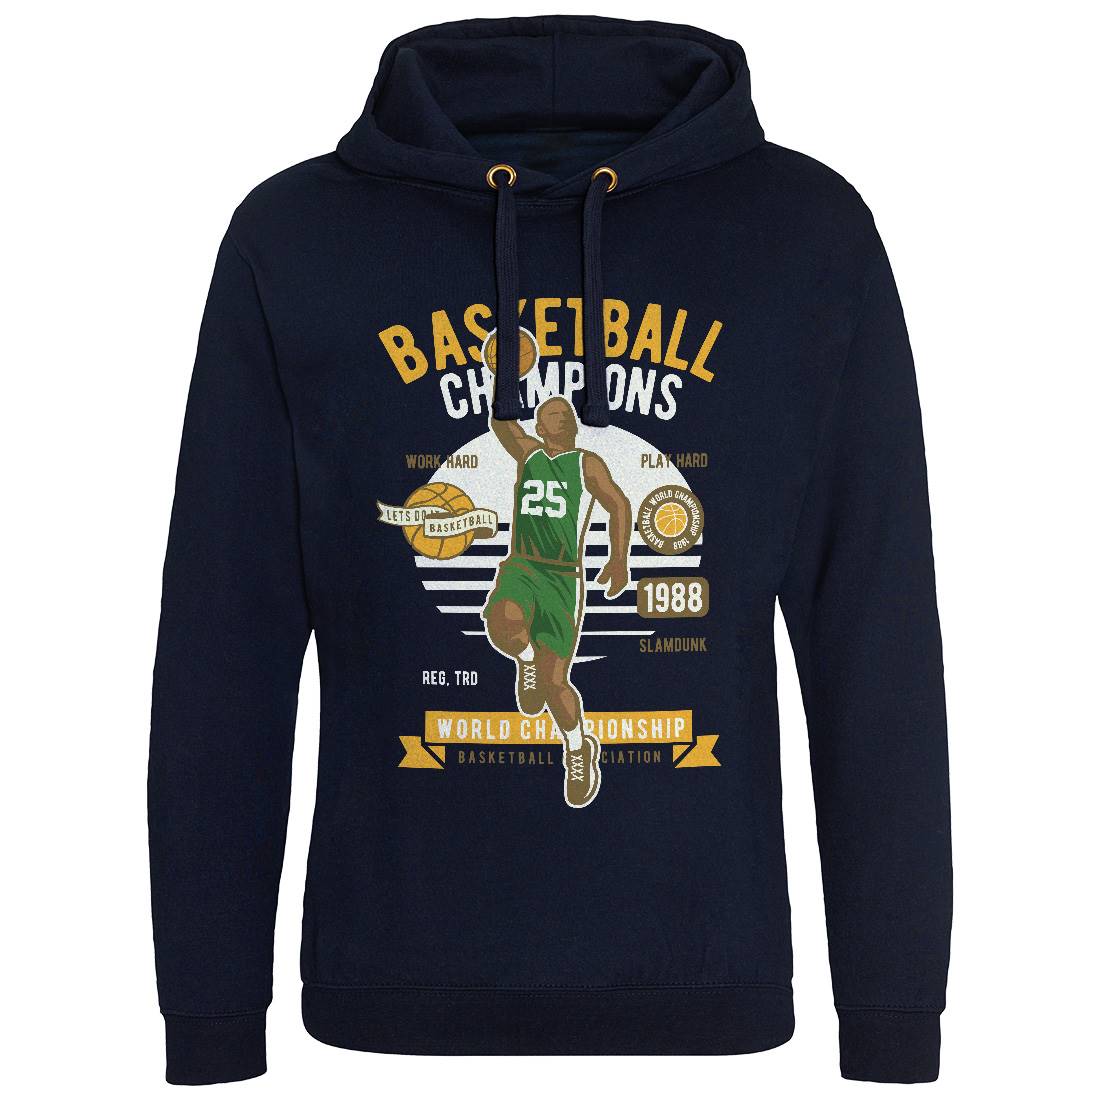 Basketball Champions Mens Hoodie Without Pocket Sport D507